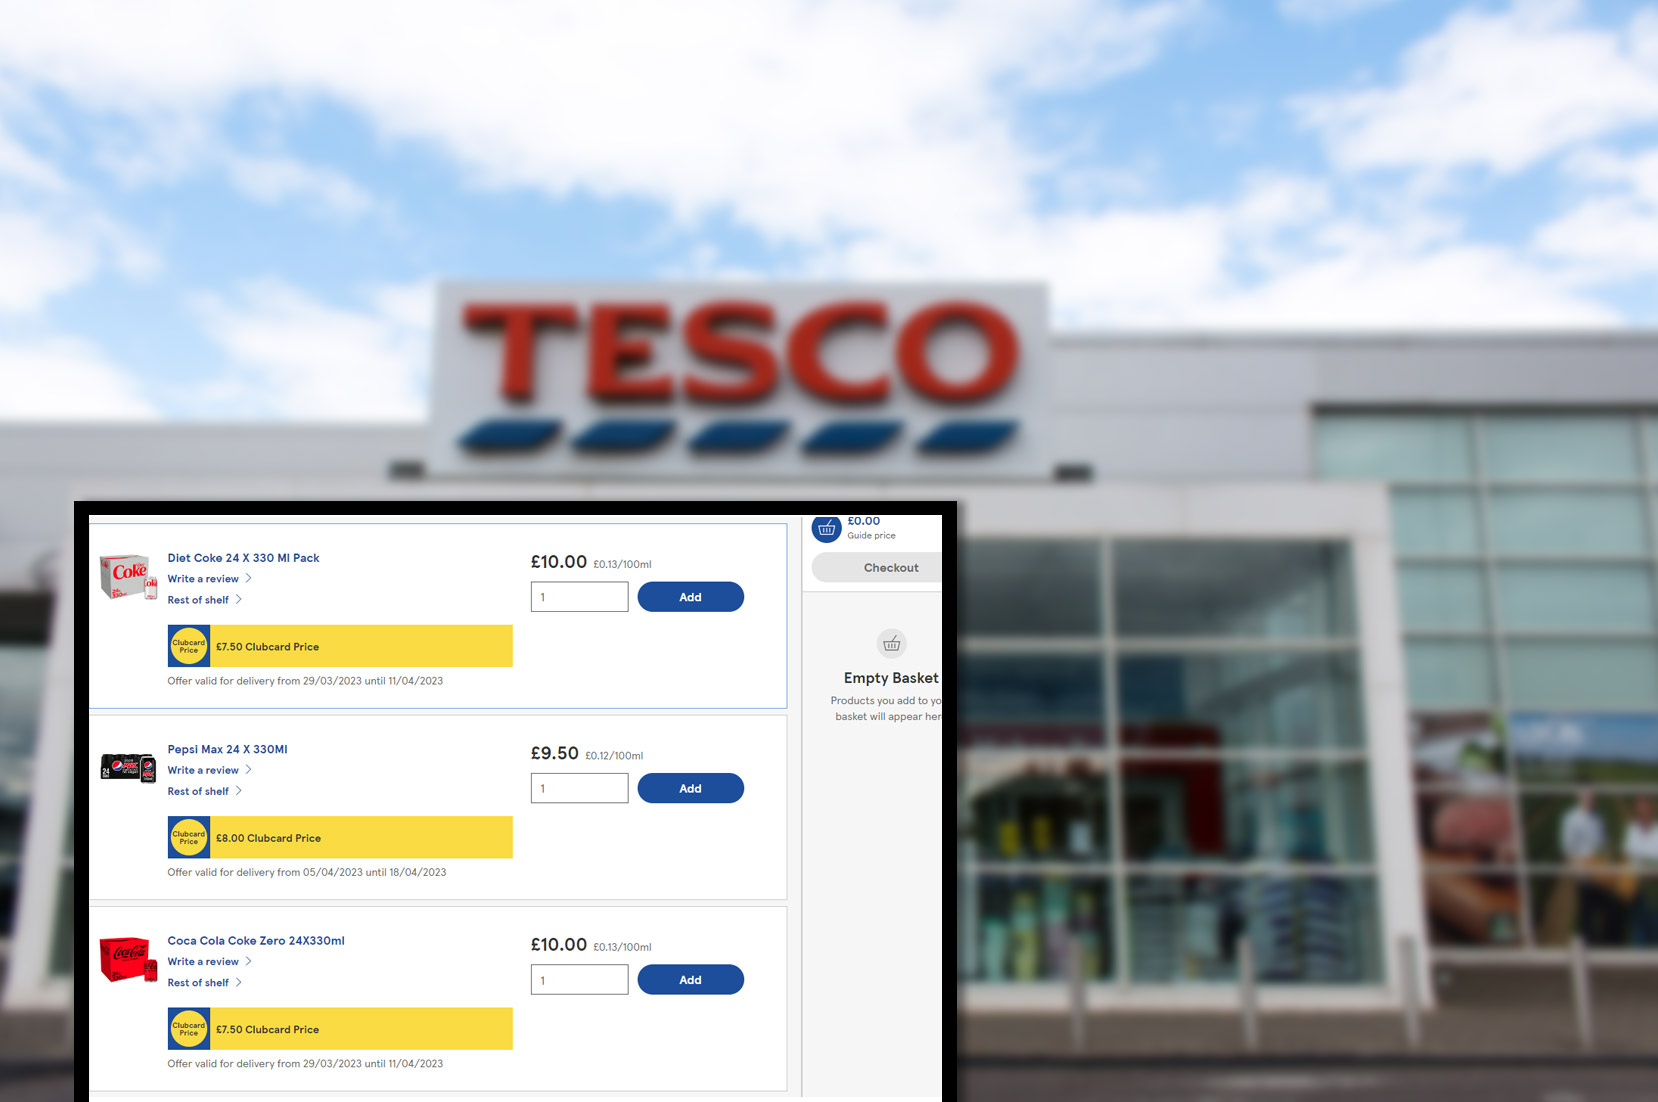 tesco-comproduct-pricing-information-and-image-scraping-services